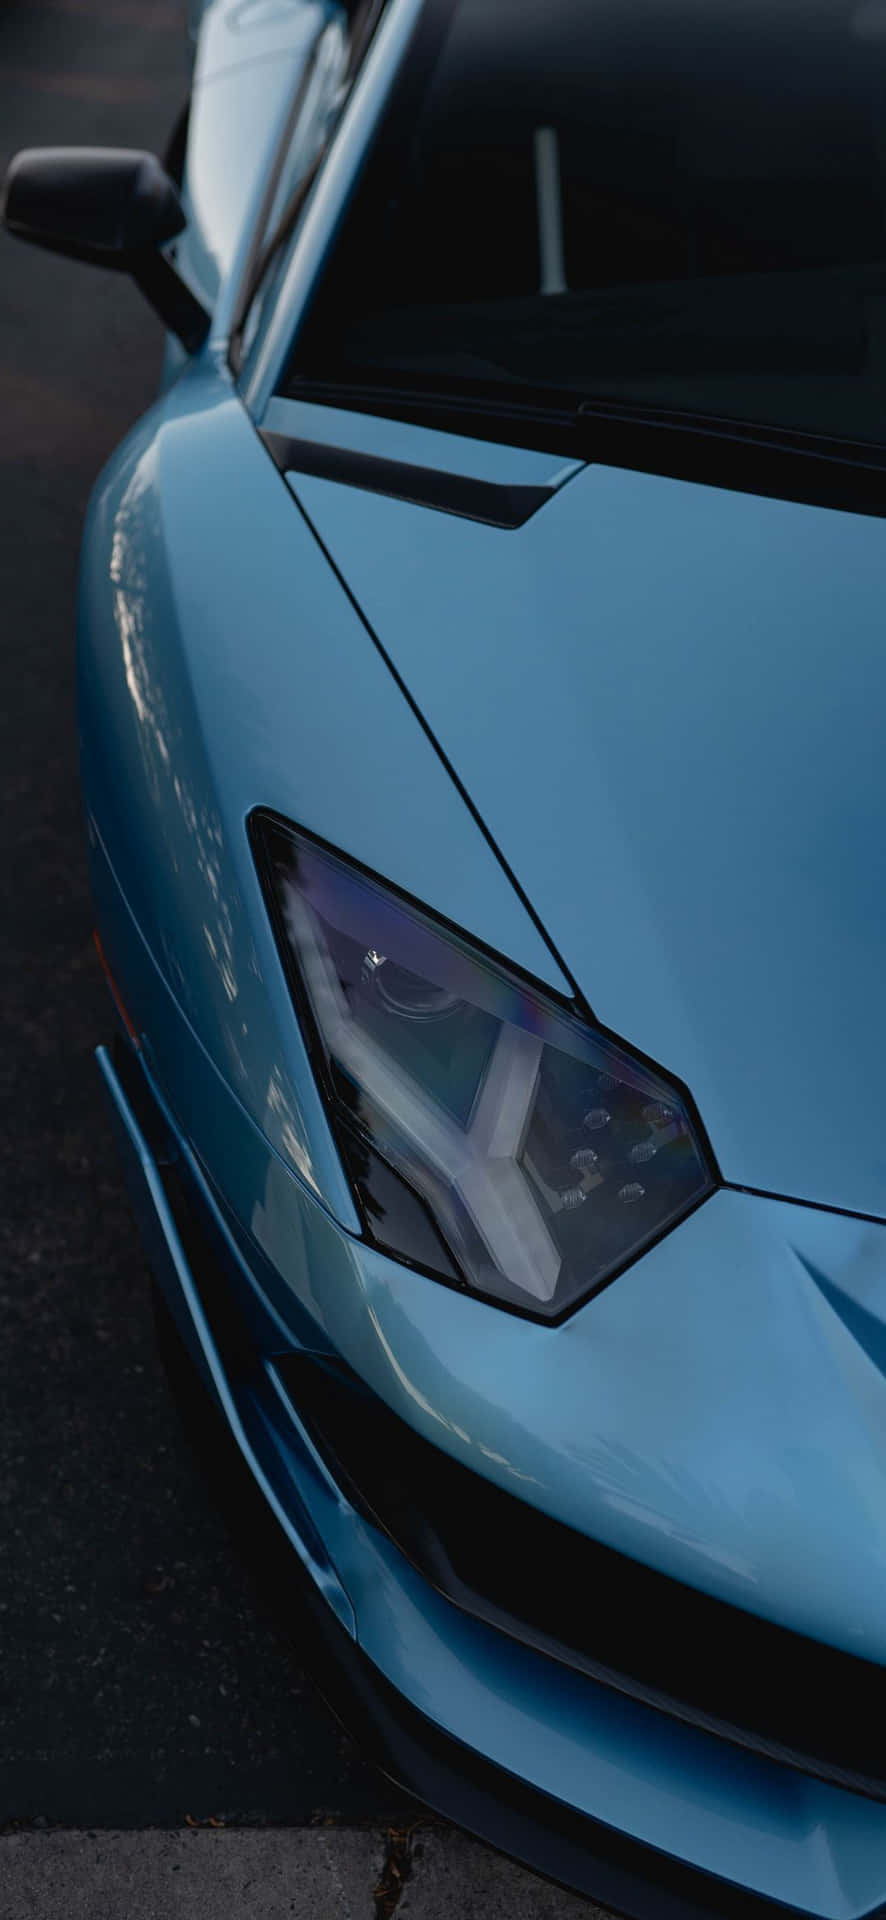 A Blue Sports Car Parked On The Street Wallpaper